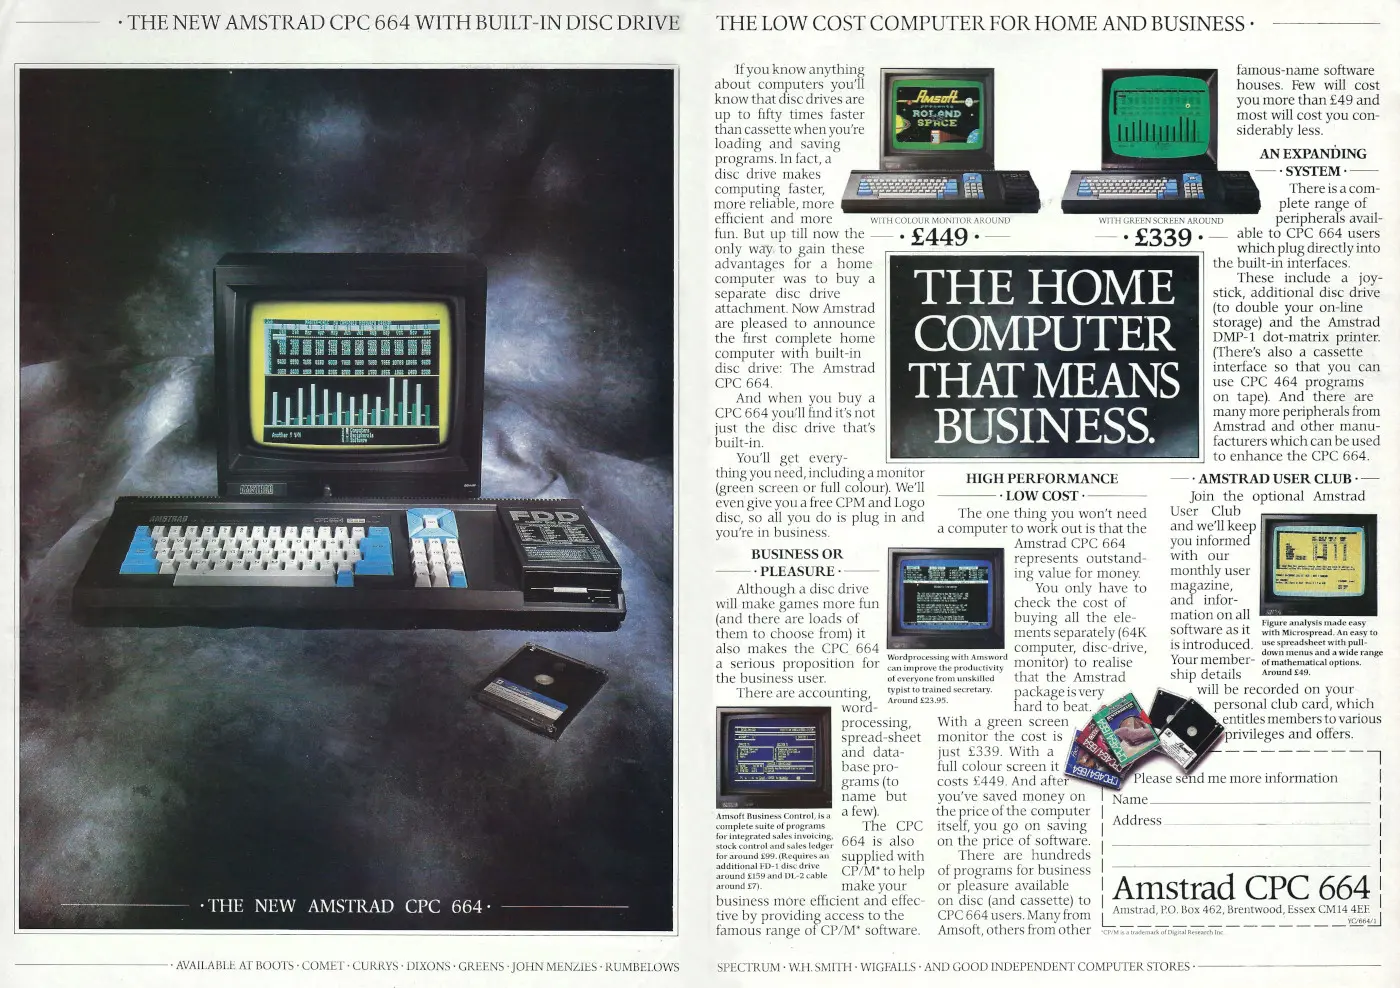 Amstrad Advert: The home computer that means business - Amstrad CPC664, from Your Computer, June 1985